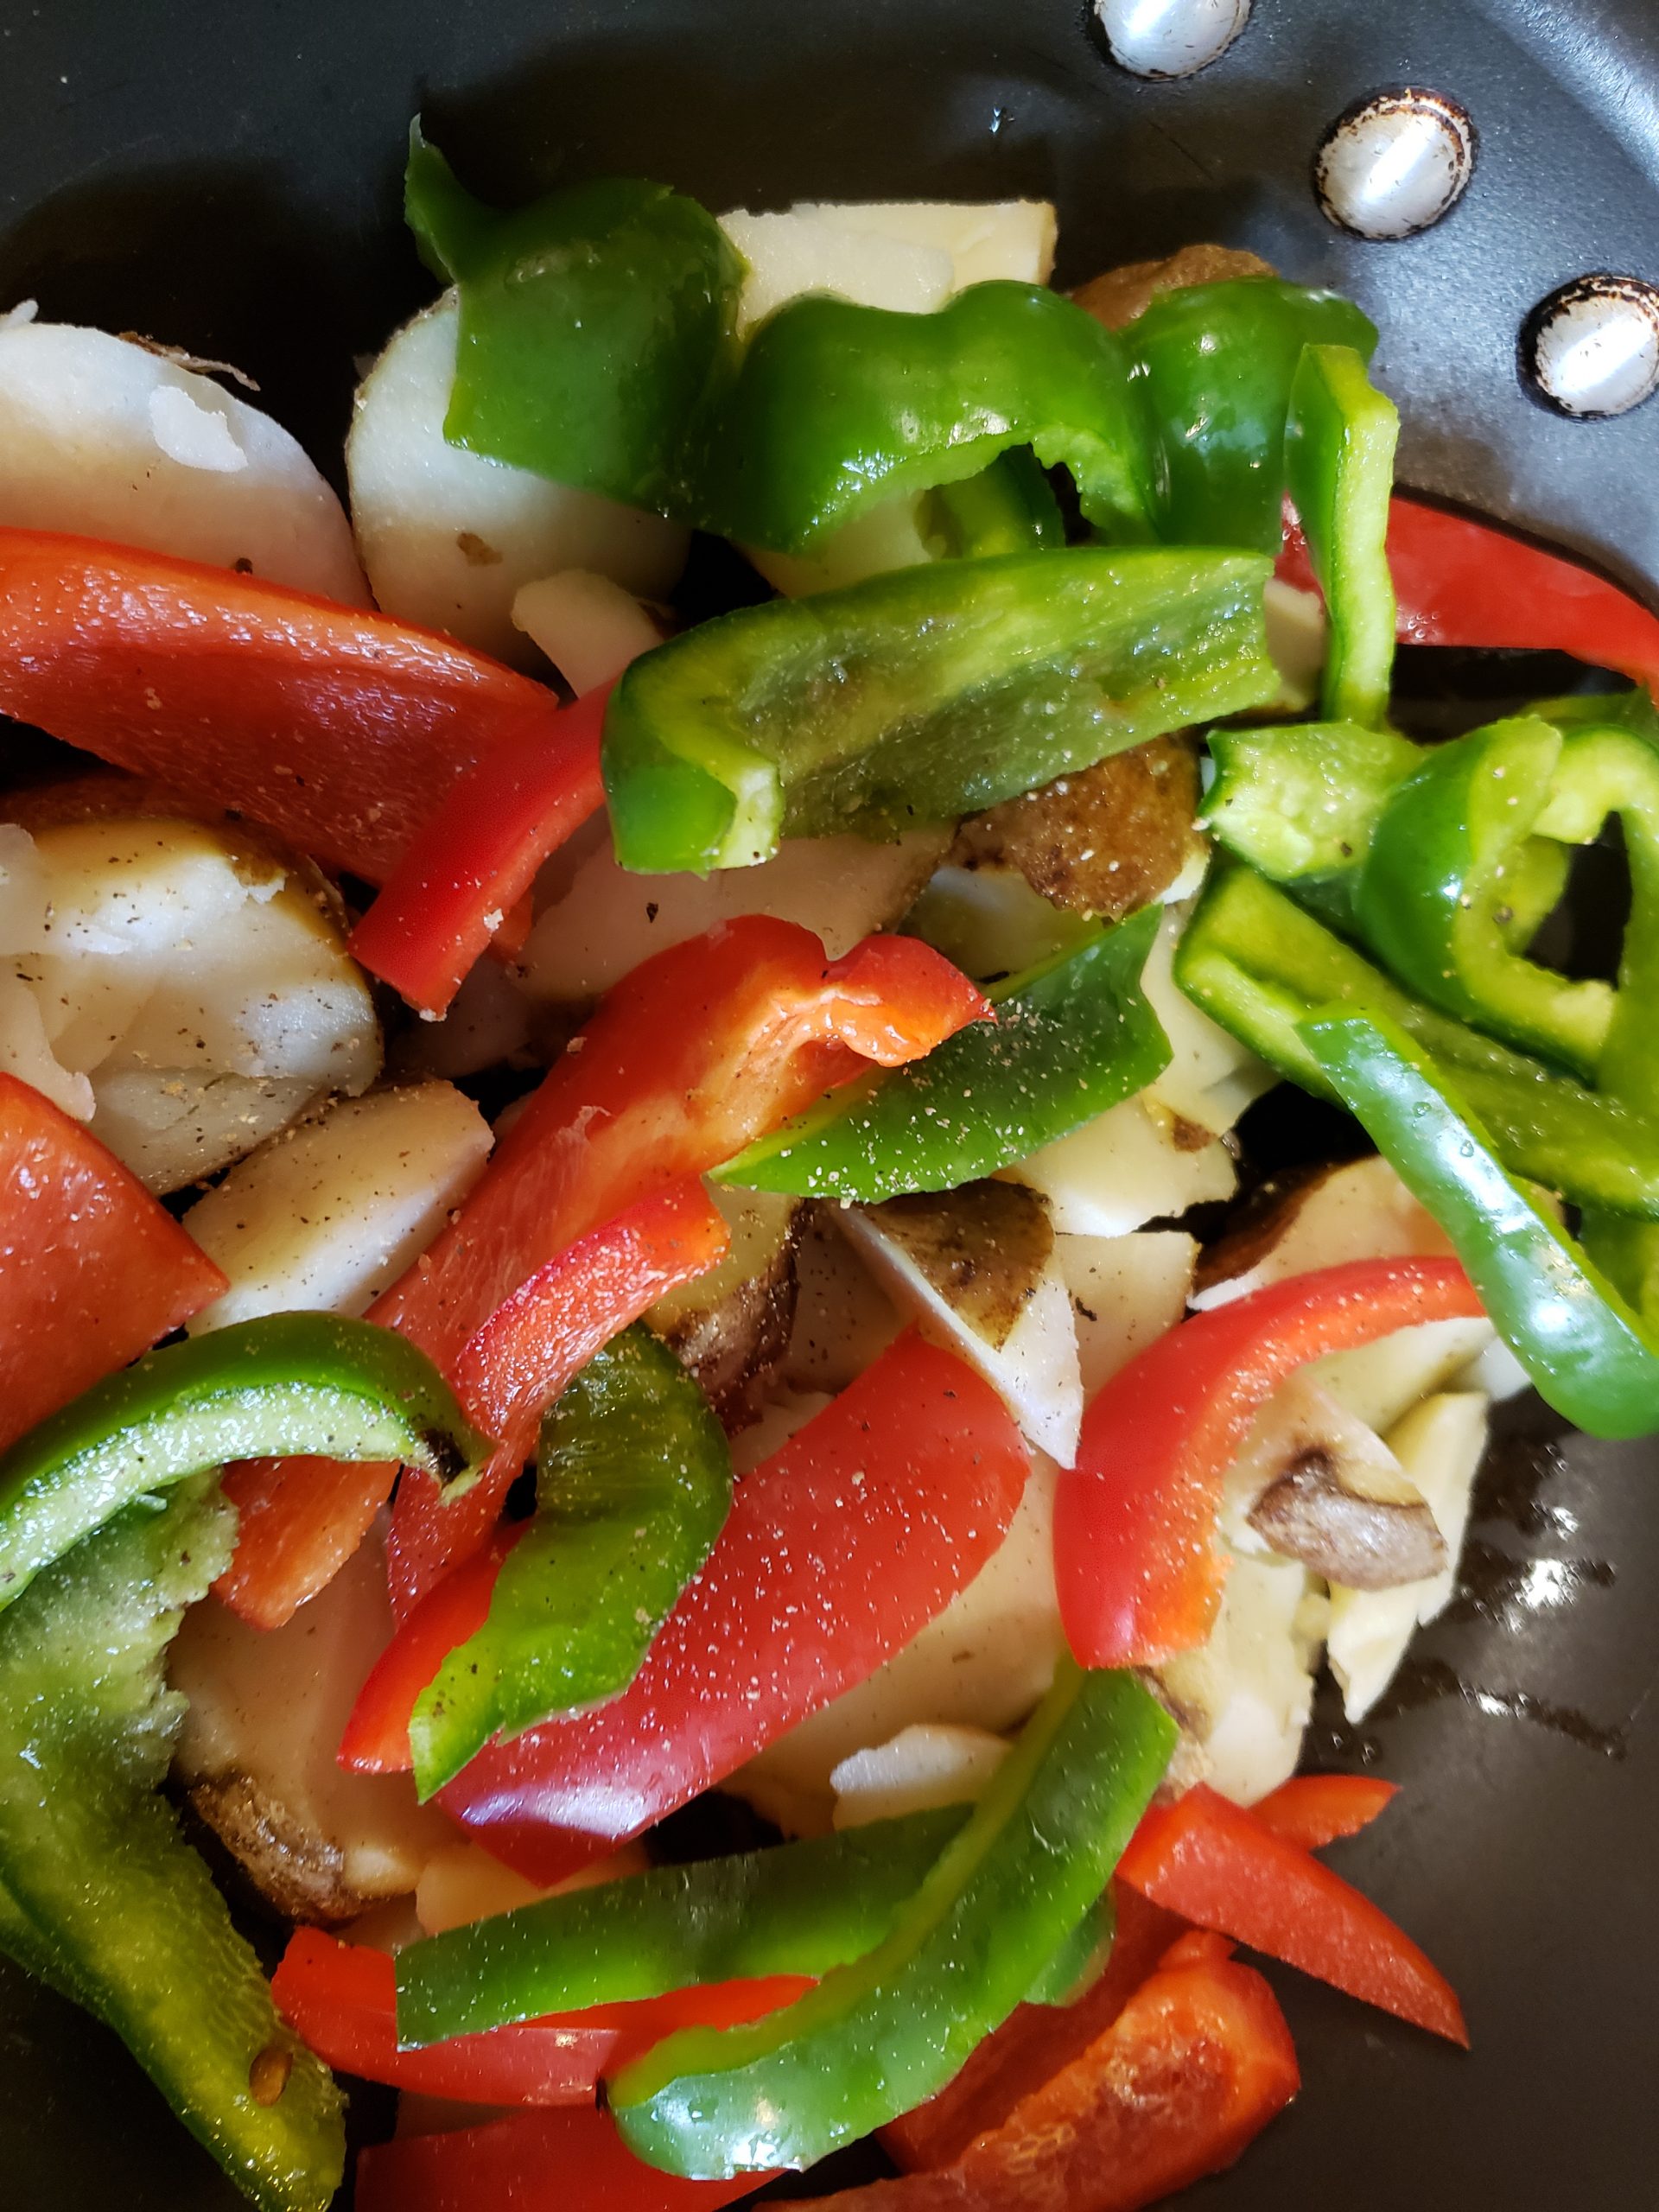 Red & Green peppers are an excellent source of Vitamin C, A, and Vitamin B6. Runners need Vitamin B6 because it helps create hemoglobin, which carries oxygen in red blood cells to muscle tissue.